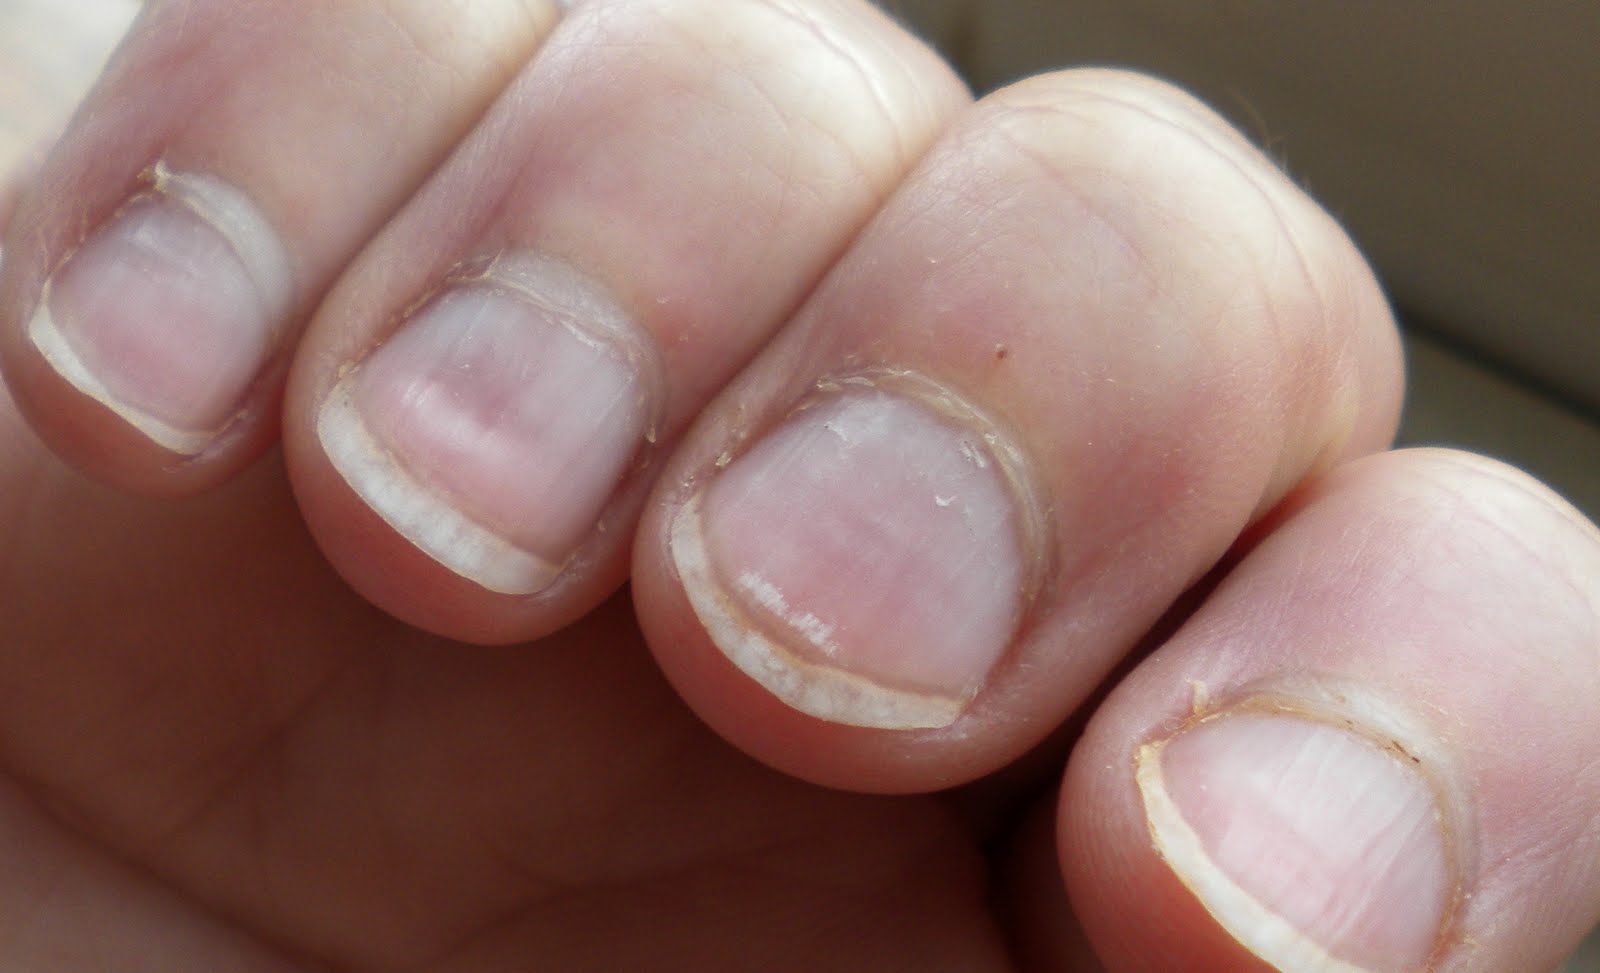 If you have dents in your nails that look like they were made by an icepick